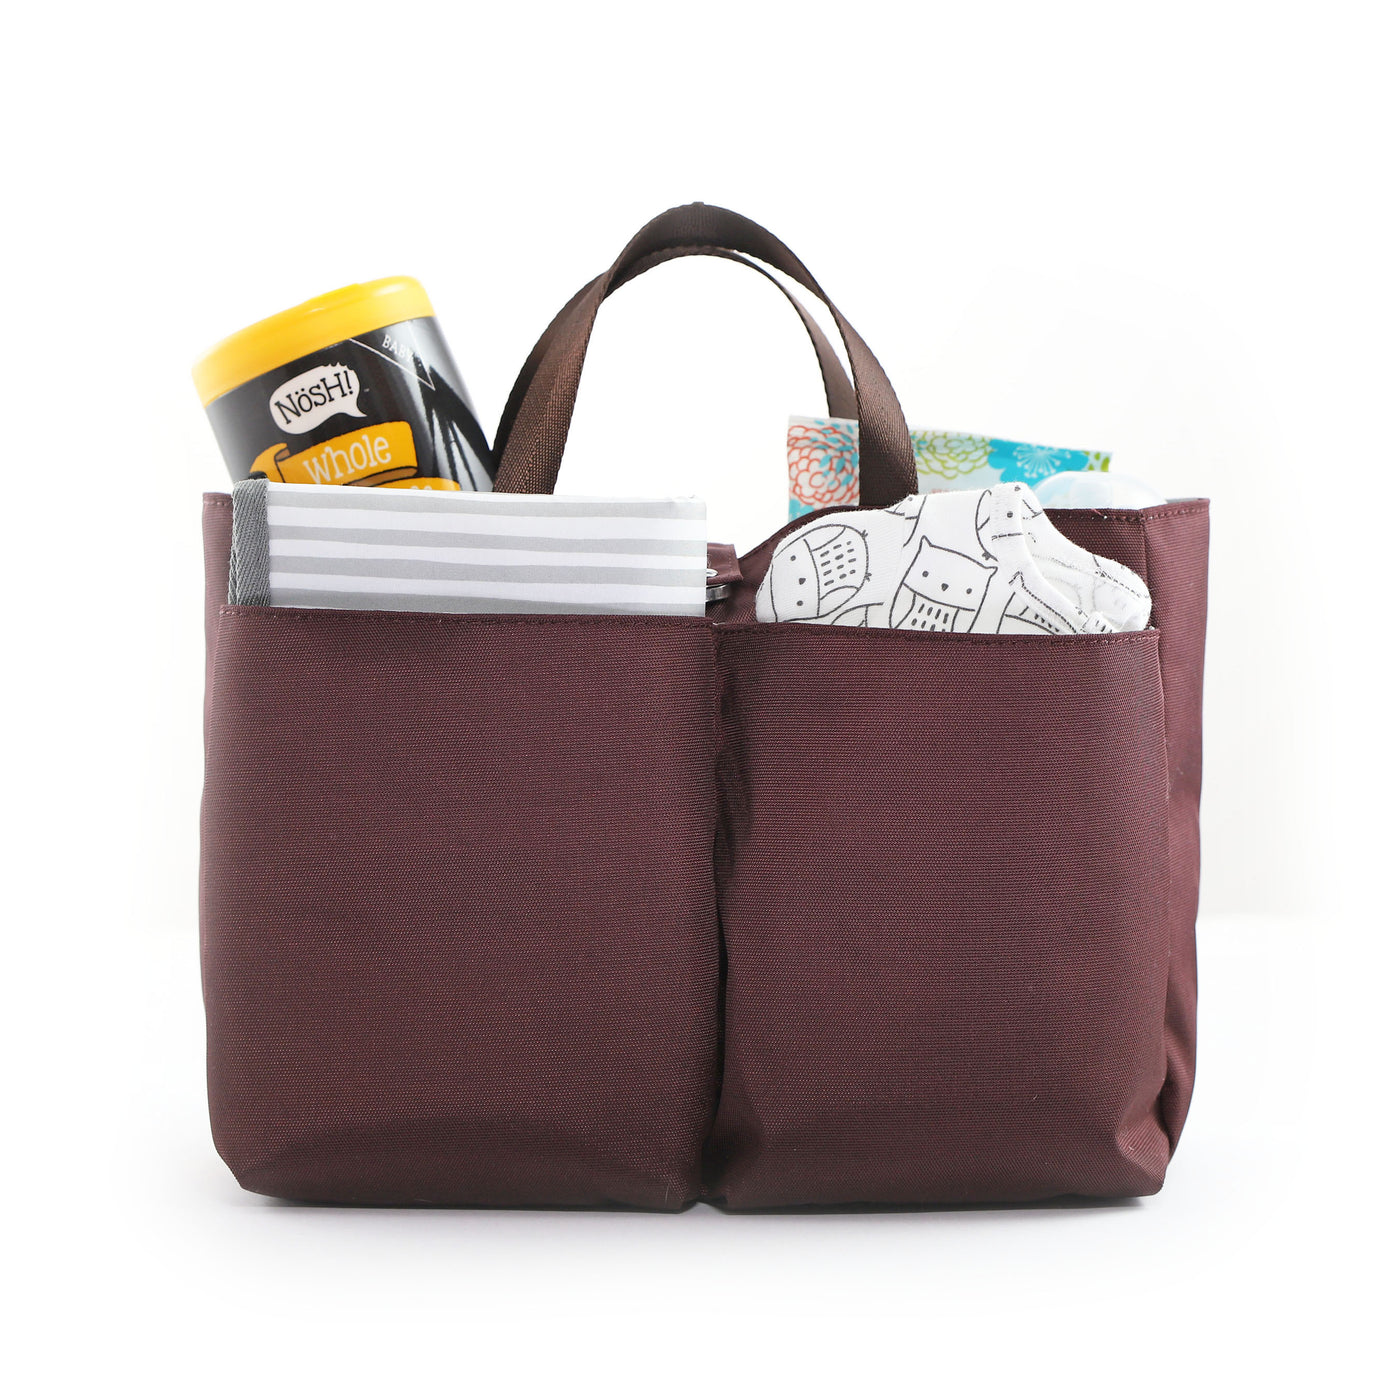 Burgundy colored polyester diaper bag insert filled with diapers, wipes, snack container and changing pad.